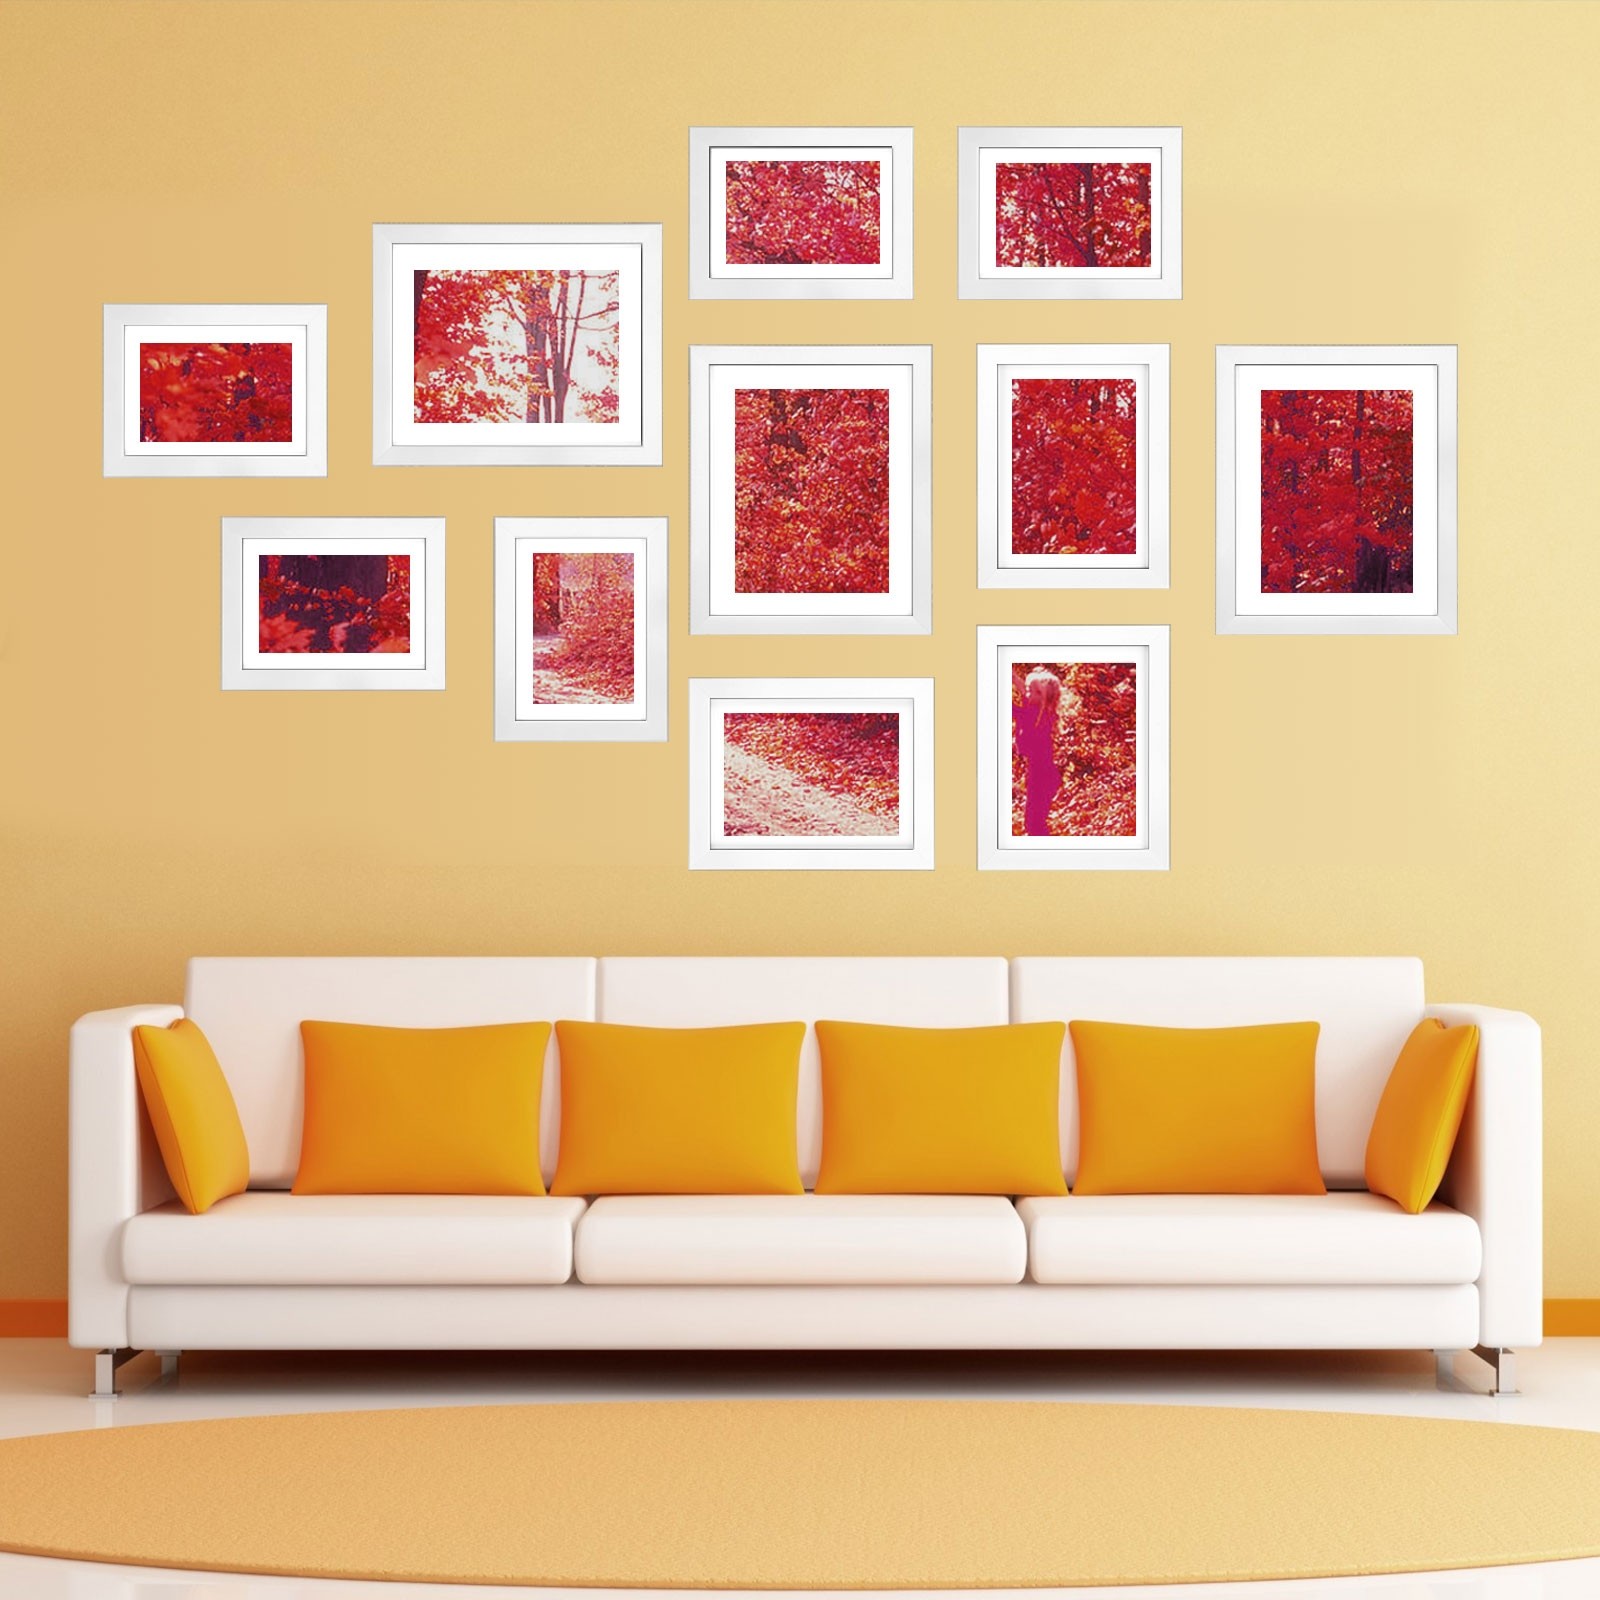 Voilamart Photo Frames Set of 11 Wall Hanging Decor Gallery Collage